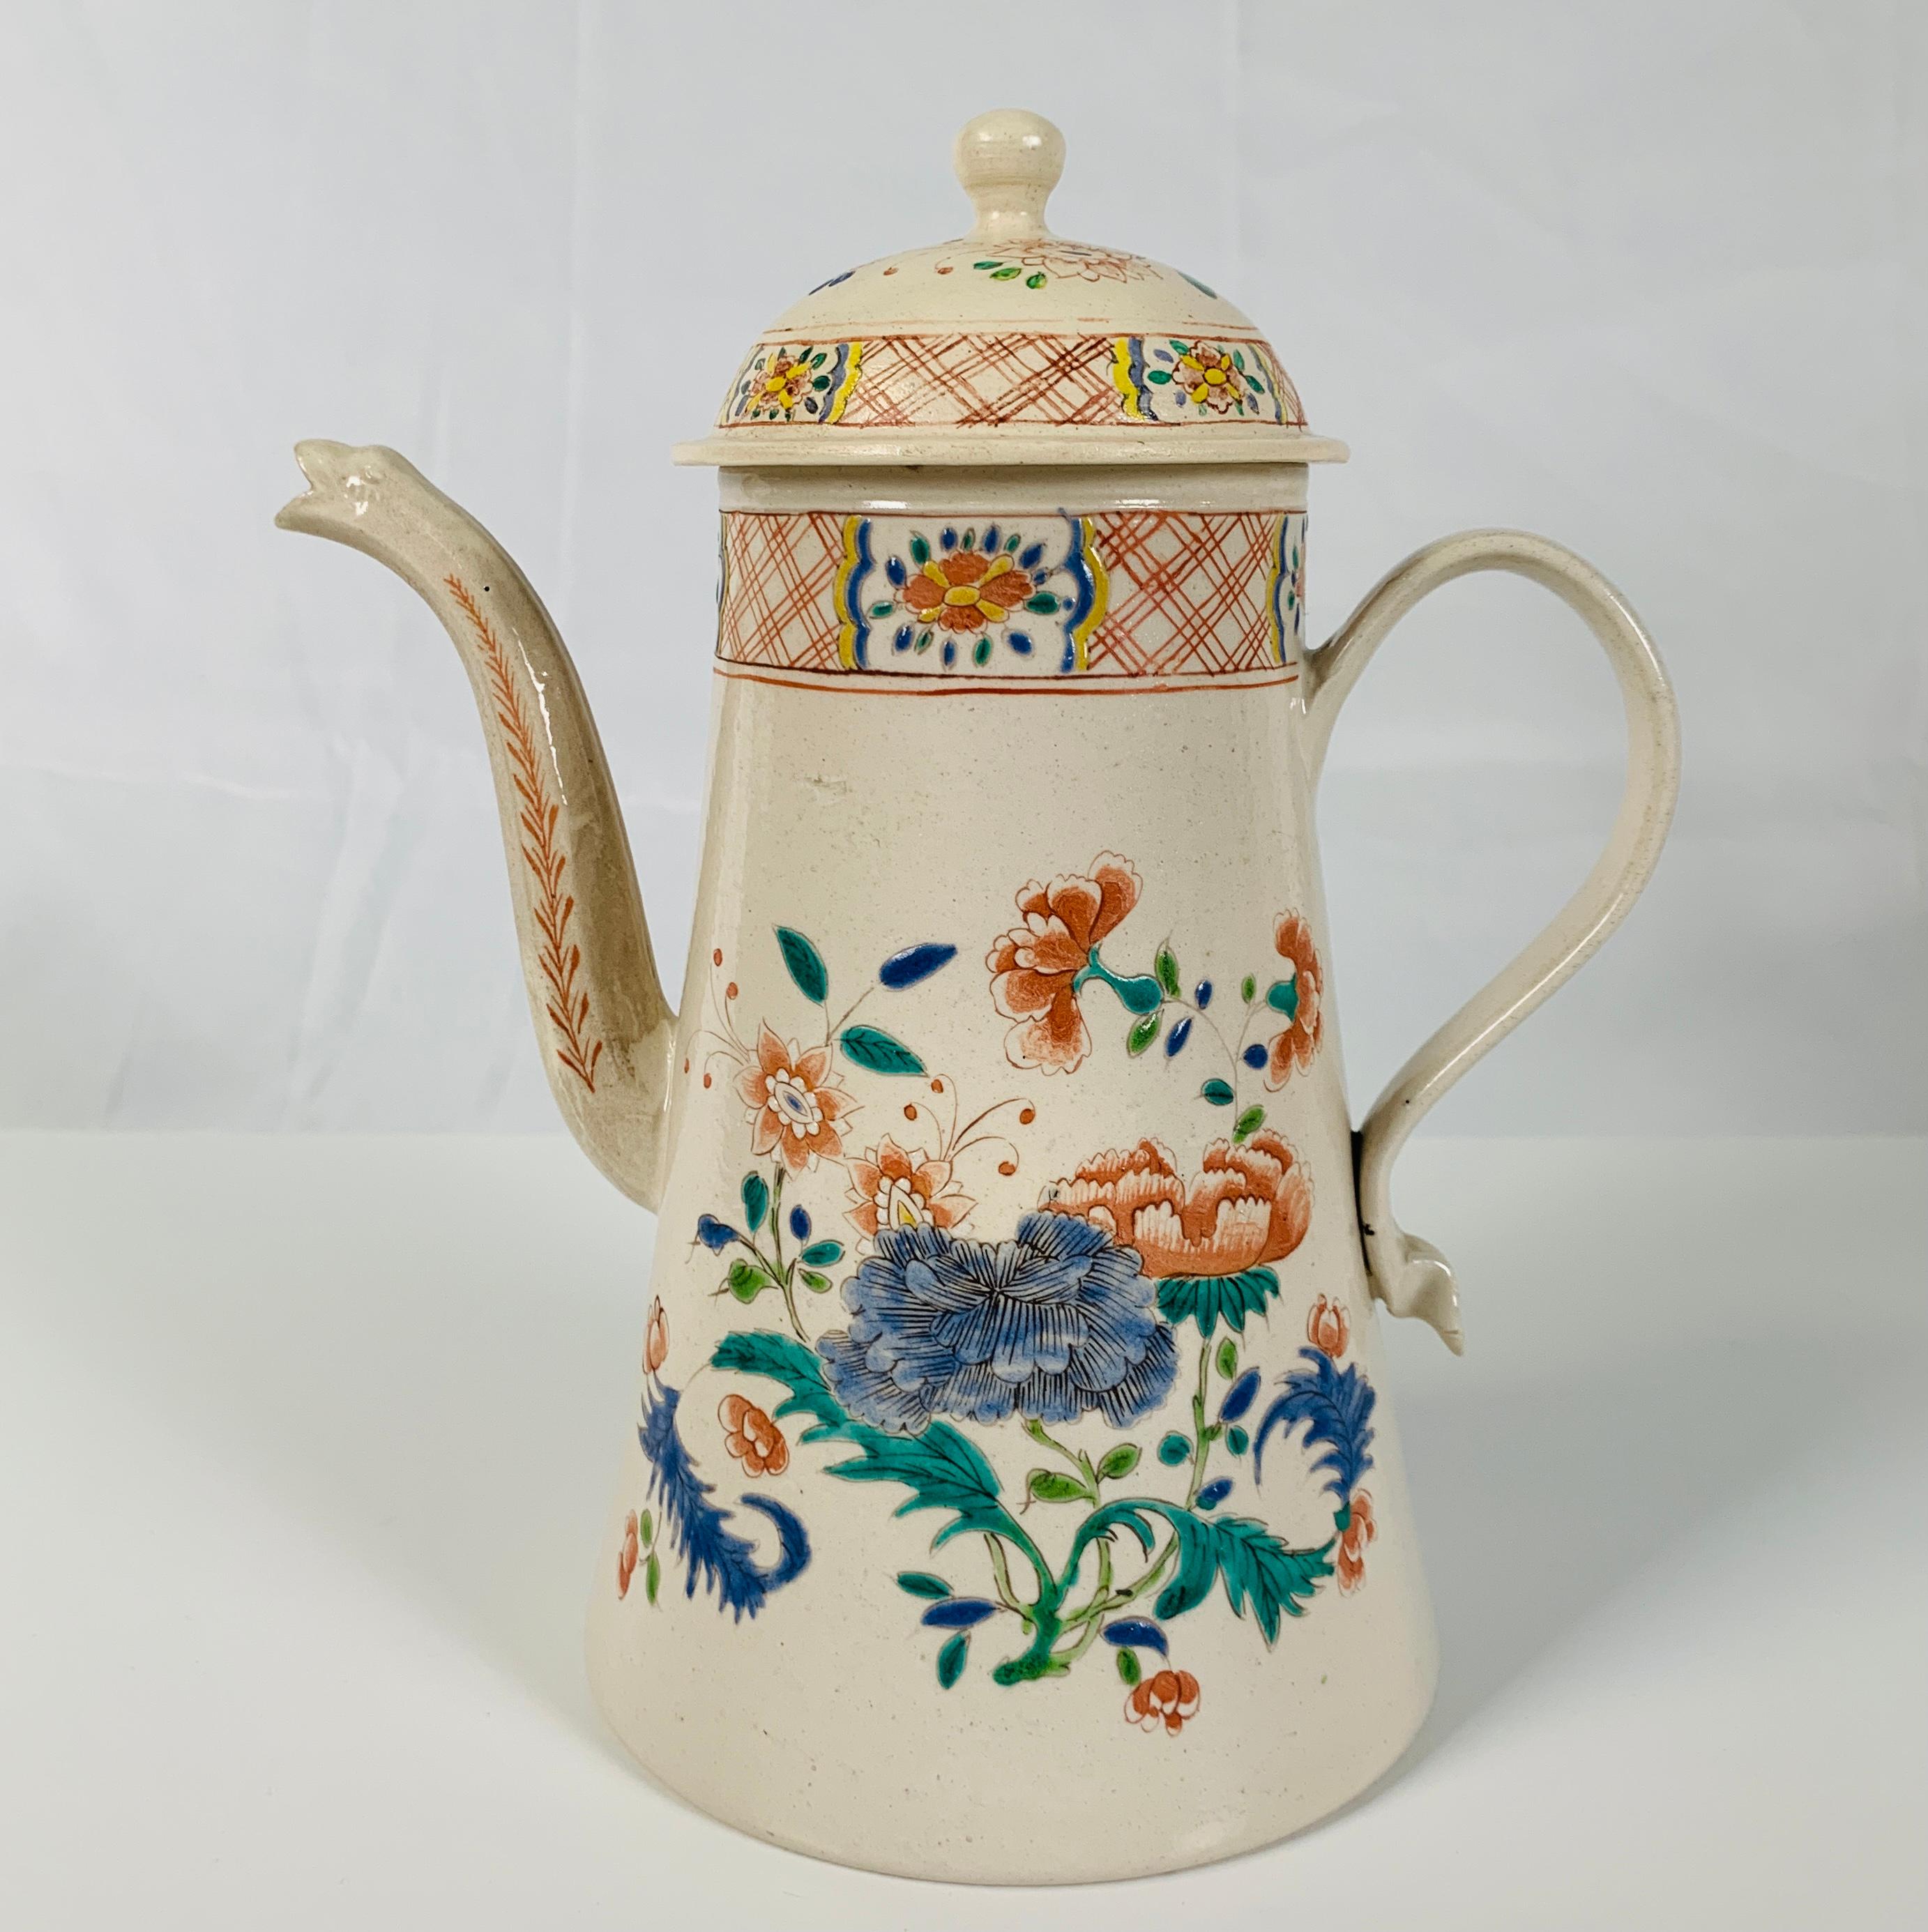 Provenance: A Private Collection; The underside of the pot has paper labels for Christie's and Matthew and Elisabeth Sharpe (See image).
Made in Staffordshire circa 1760, the pot is decorated with colorful enamels. All of the decoration on this